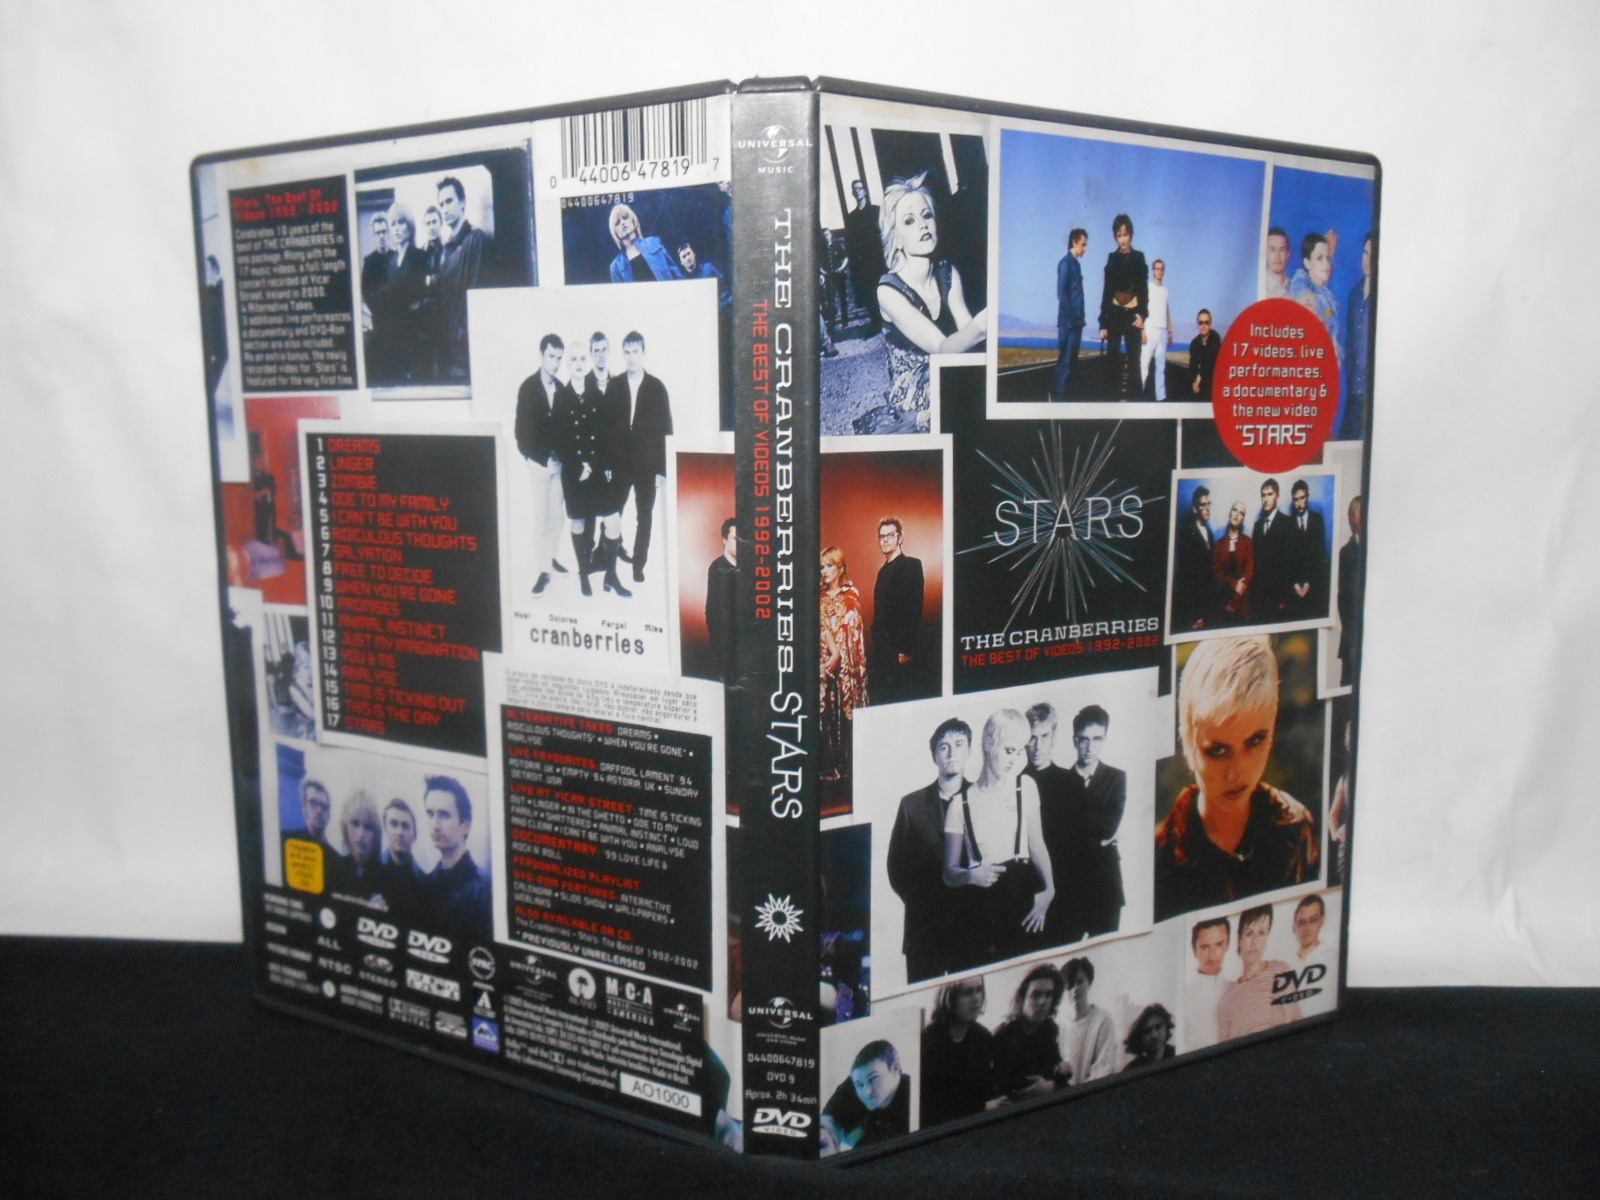 DVD - Cranberries the - Stars the Best of Videos 1992-2002